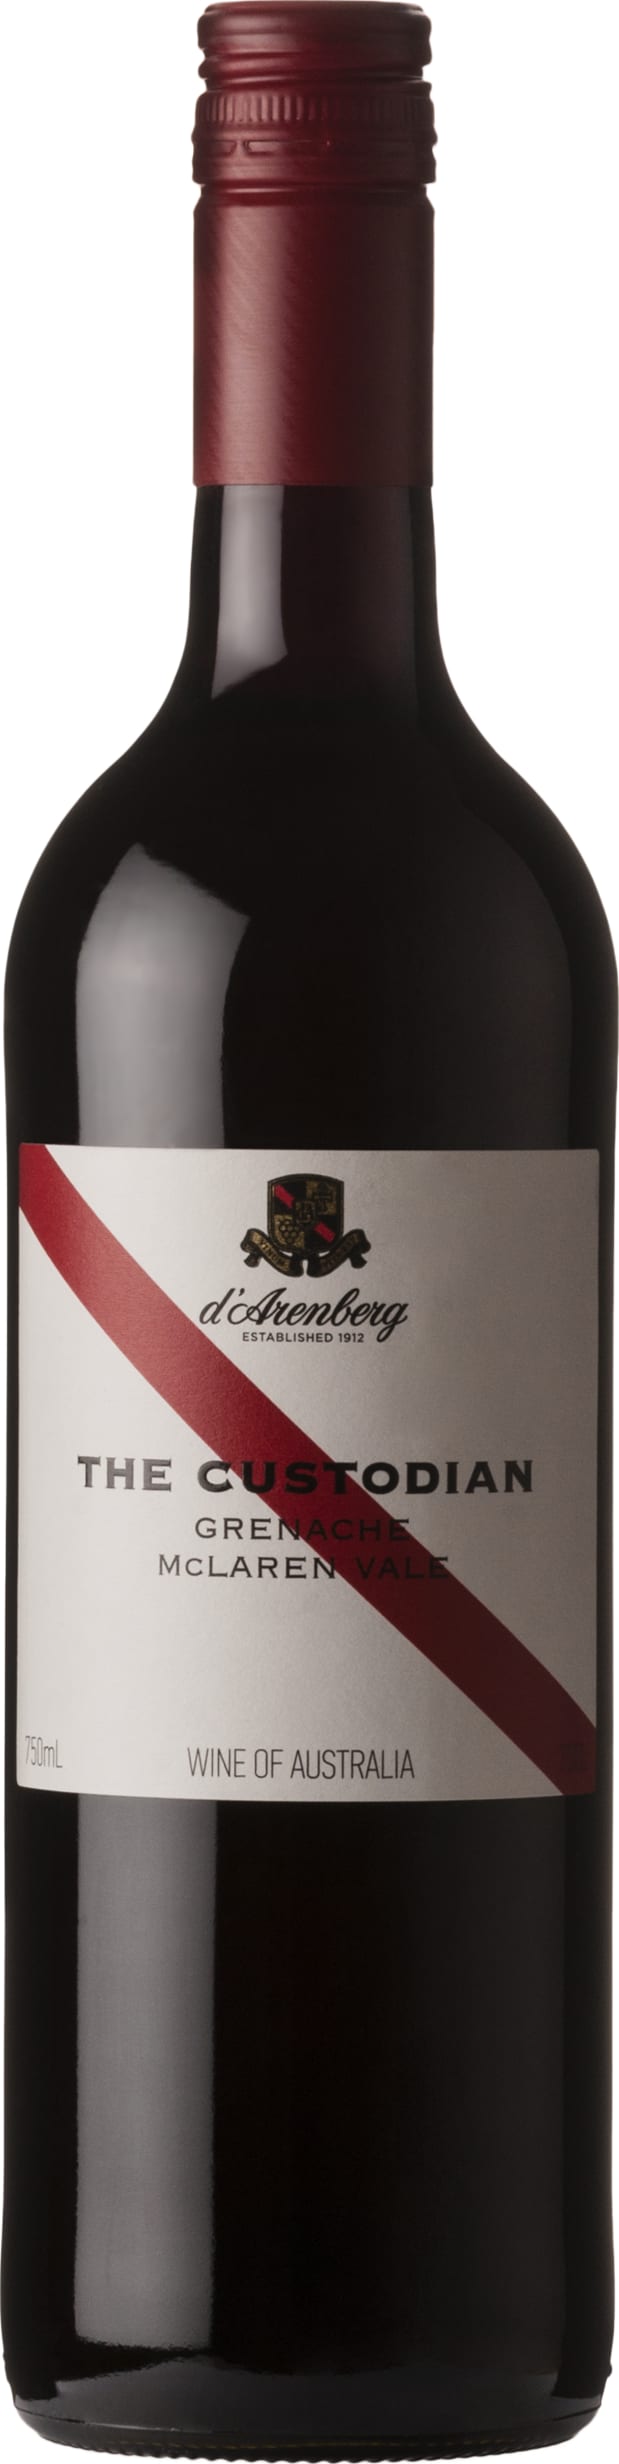 D Arenberg The Custodian Grenache 2019 75cl - Buy D Arenberg Wines from GREAT WINES DIRECT wine shop